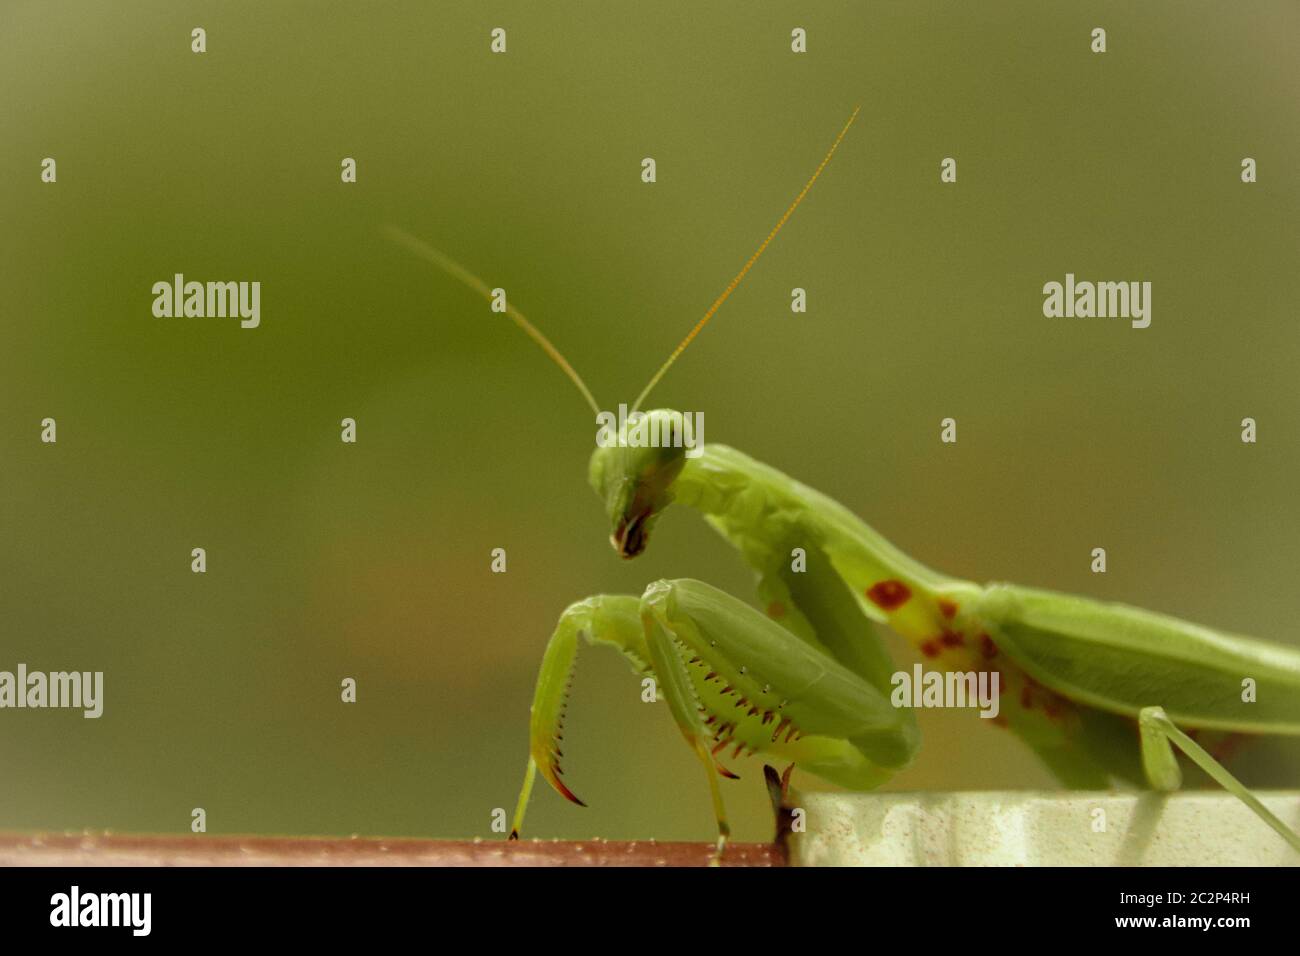 Close up of a green praying mantis or Mantodea that shows concept of Spring and Summer season Stock Photo